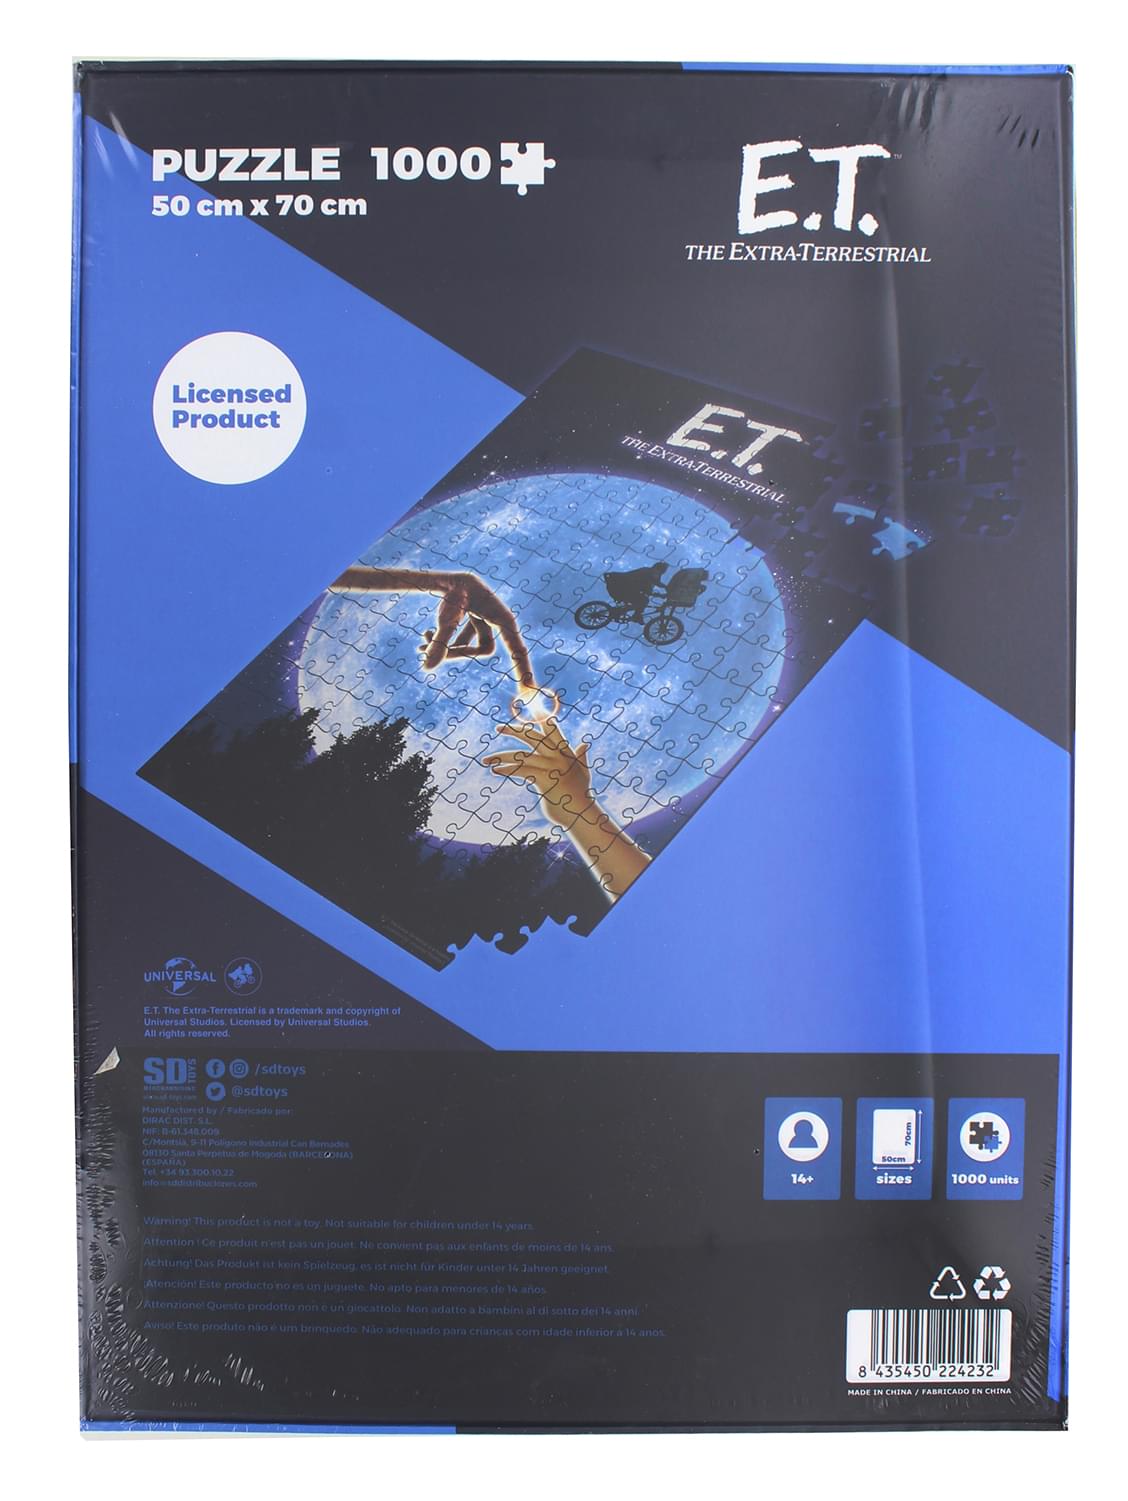 E.T. The Extra-Terrestrial Movie Poster 1000 Piece Jigsaw Puzzle